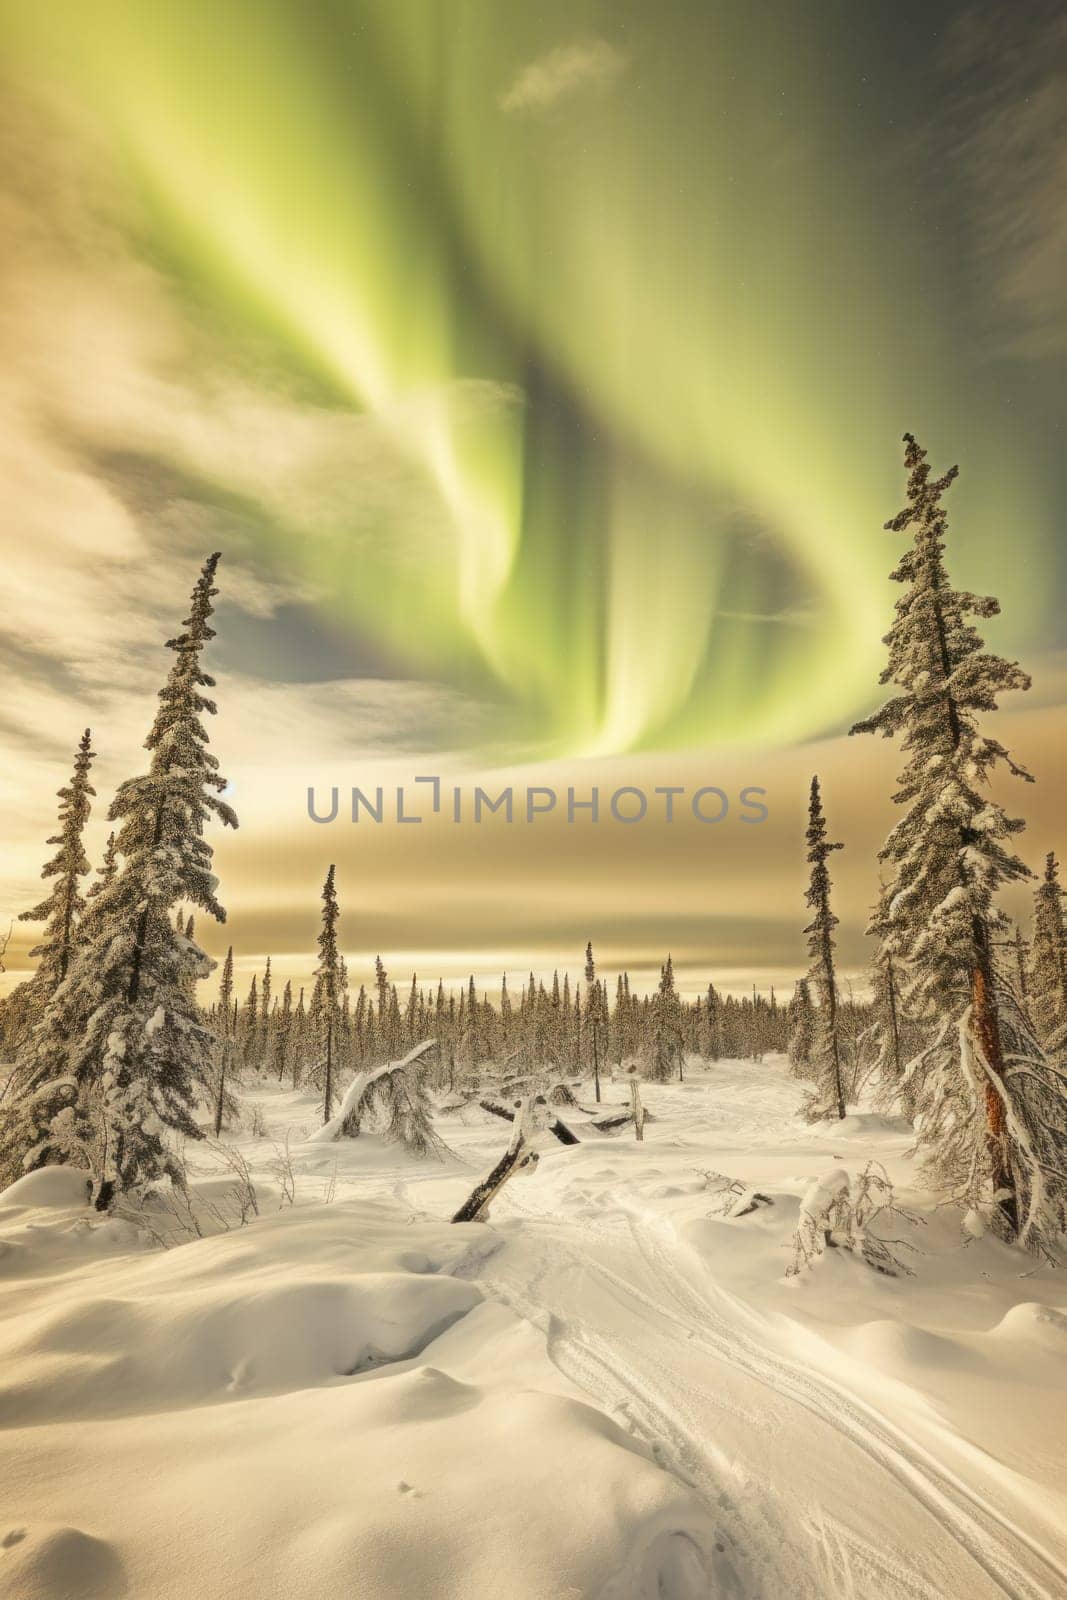 The aurora bore lights up the sky over a snowy landscape, AI by starush